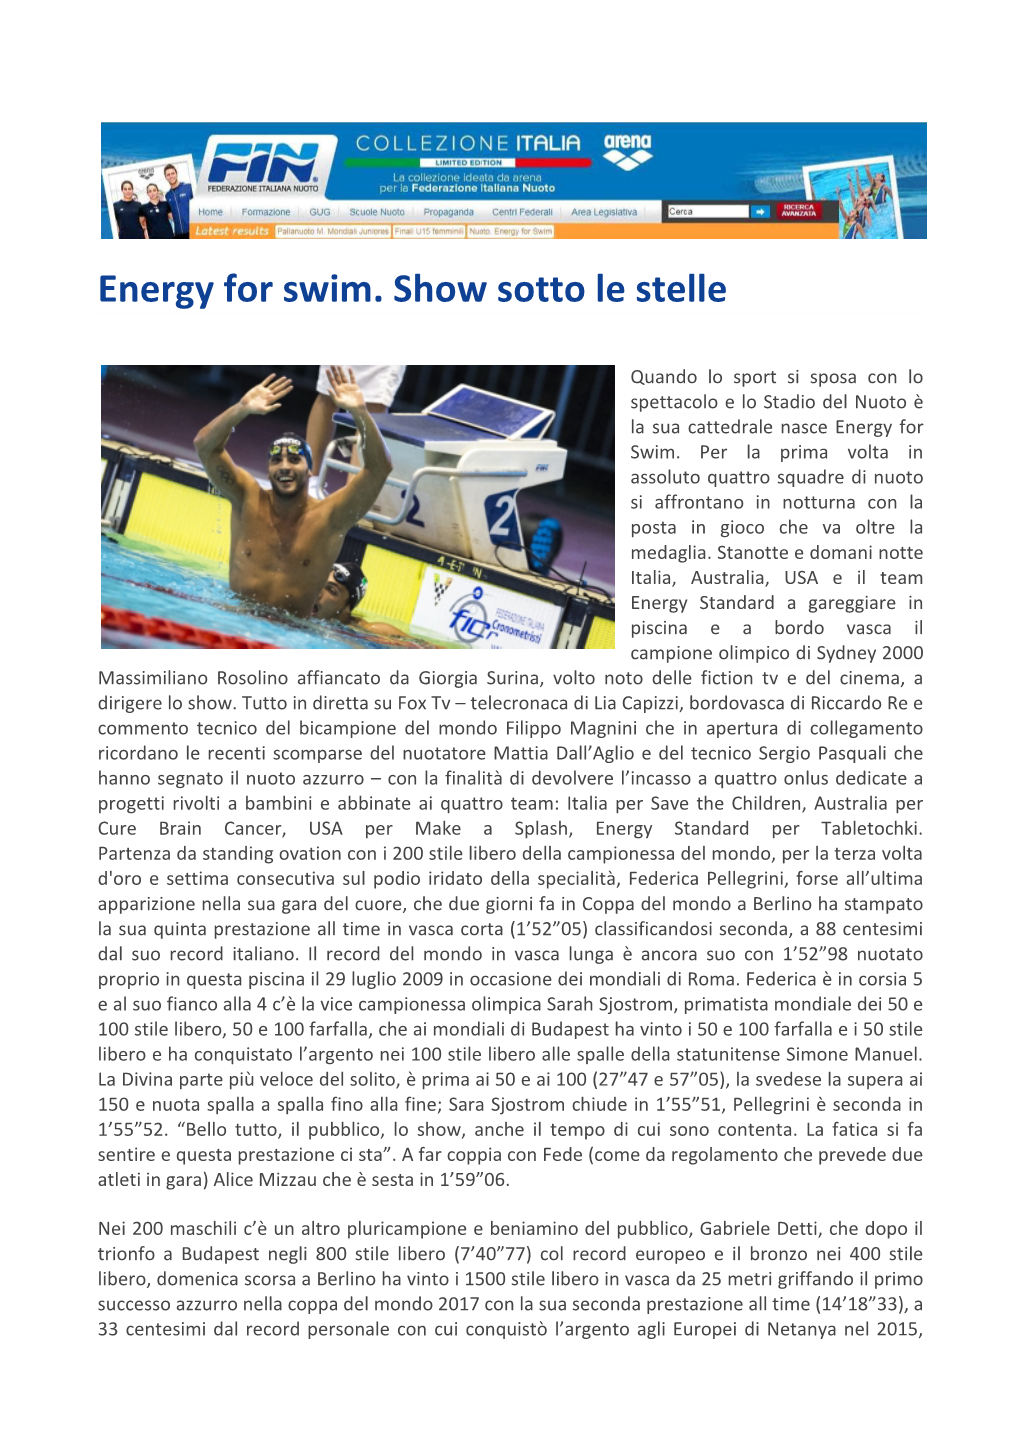 Energy for Swim. Show Sotto Le Stelle